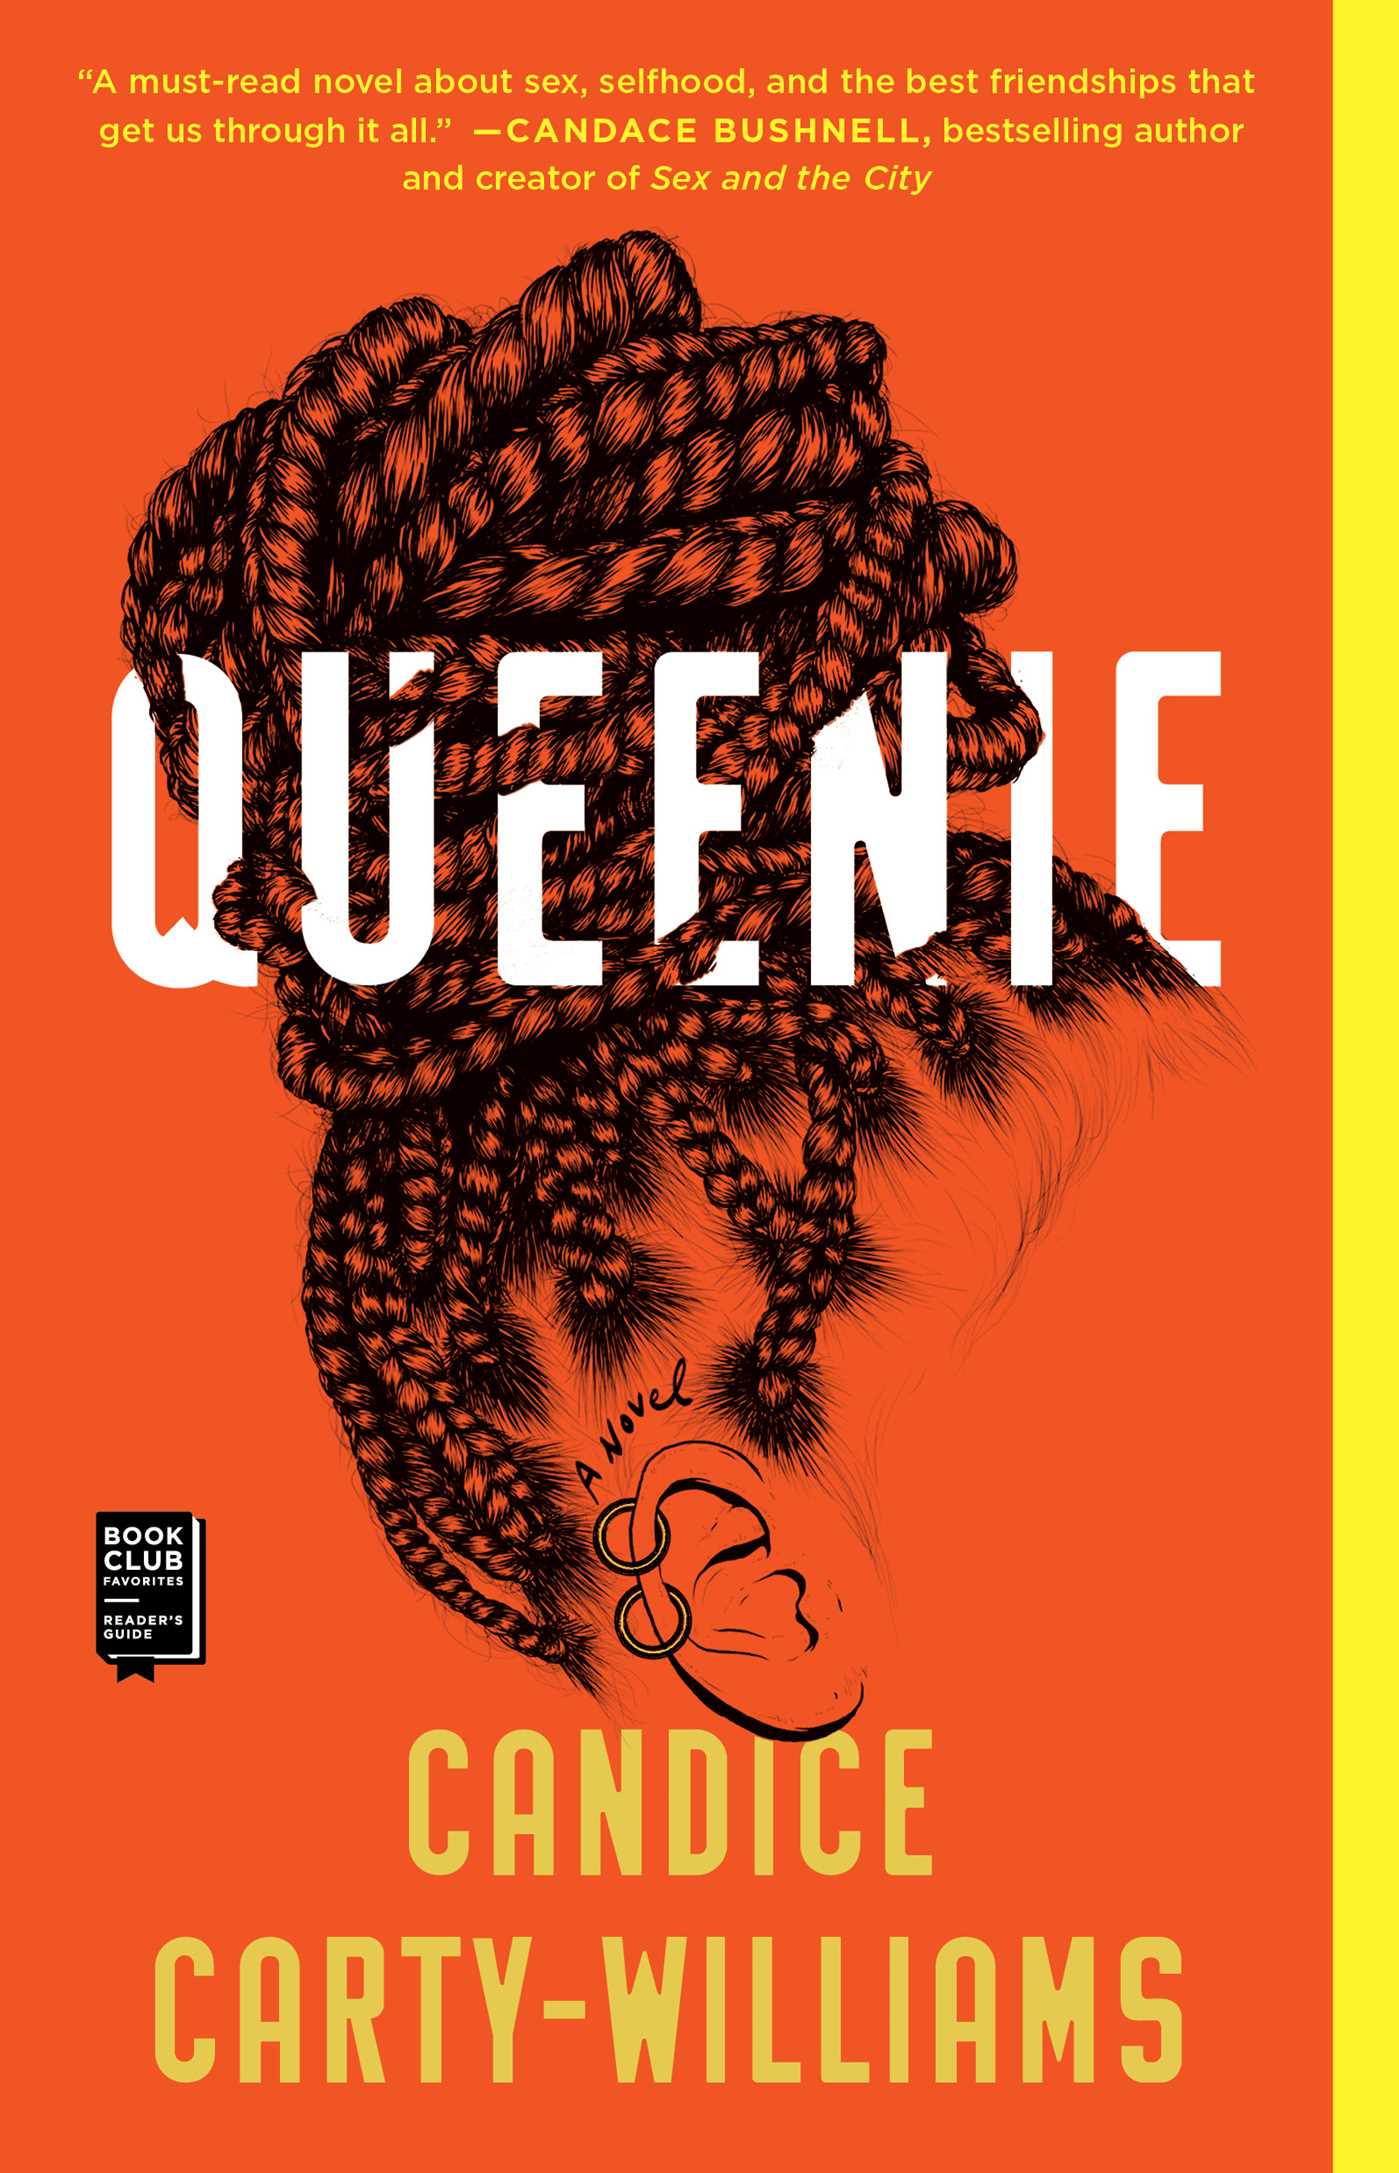 Image for "Queenie"